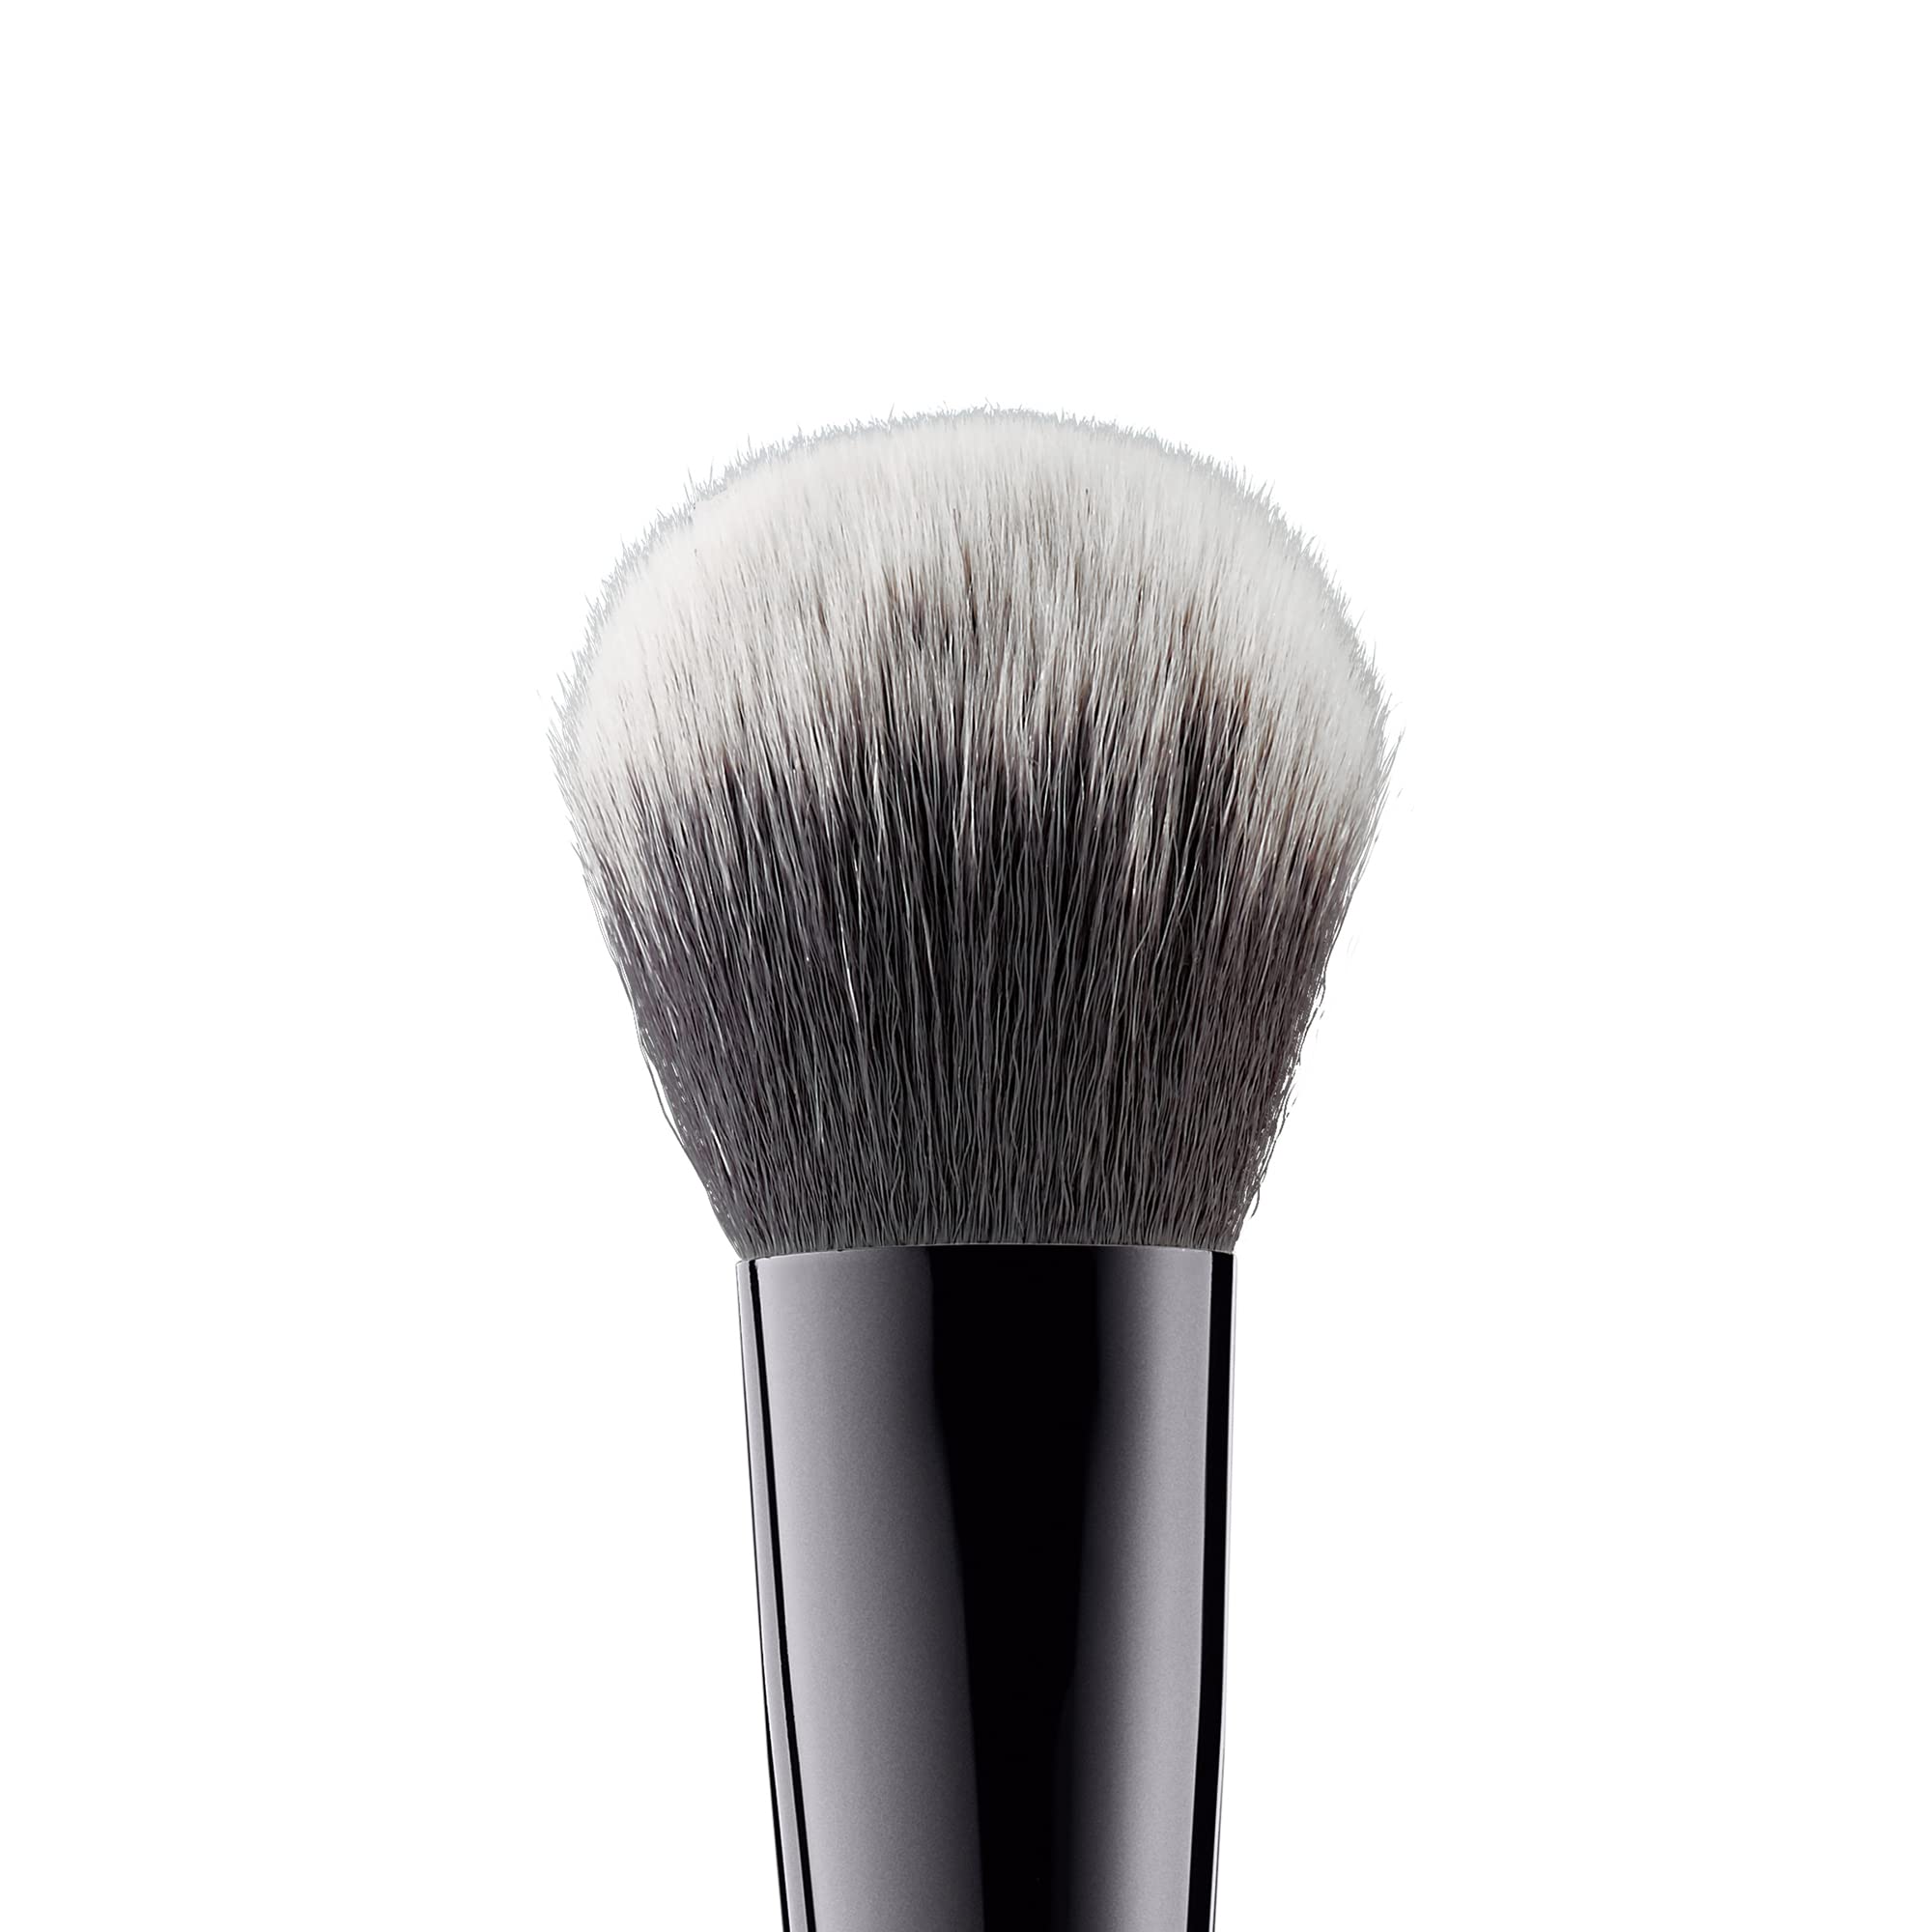 e.l.f. elf Flawless Face Brush, Vegan Makeup Tool For Flawlessly contouring & Defining With Powder, Blush & Bronzer, Made With cruelty-